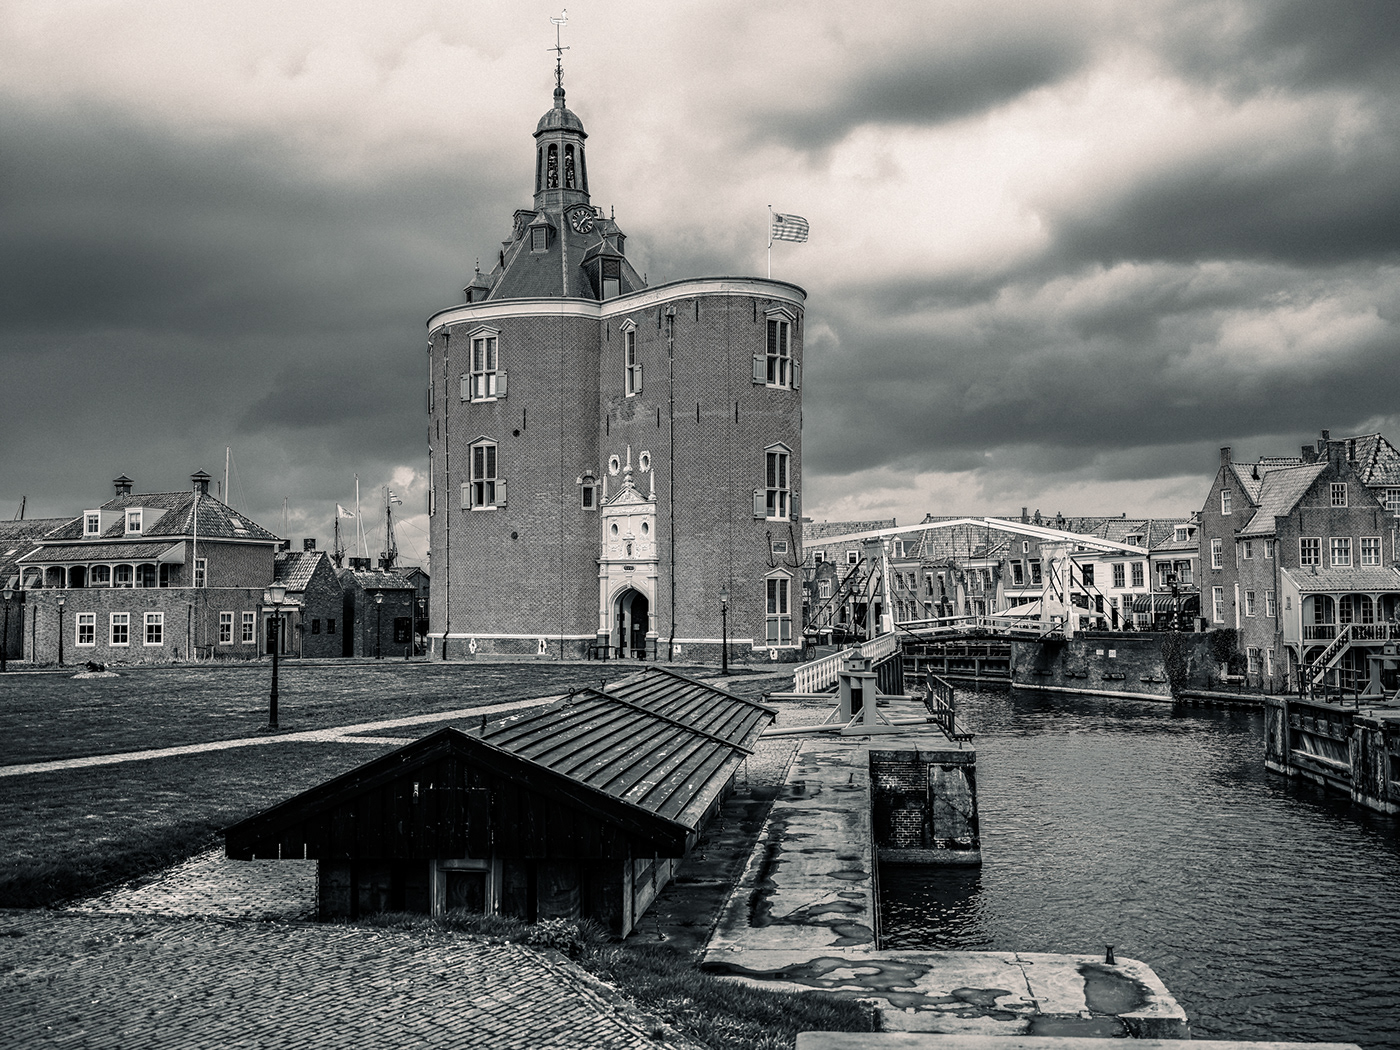 black and white Netherlands Boats architure spring rain Moody Cumulus Clouds Enkhuizen